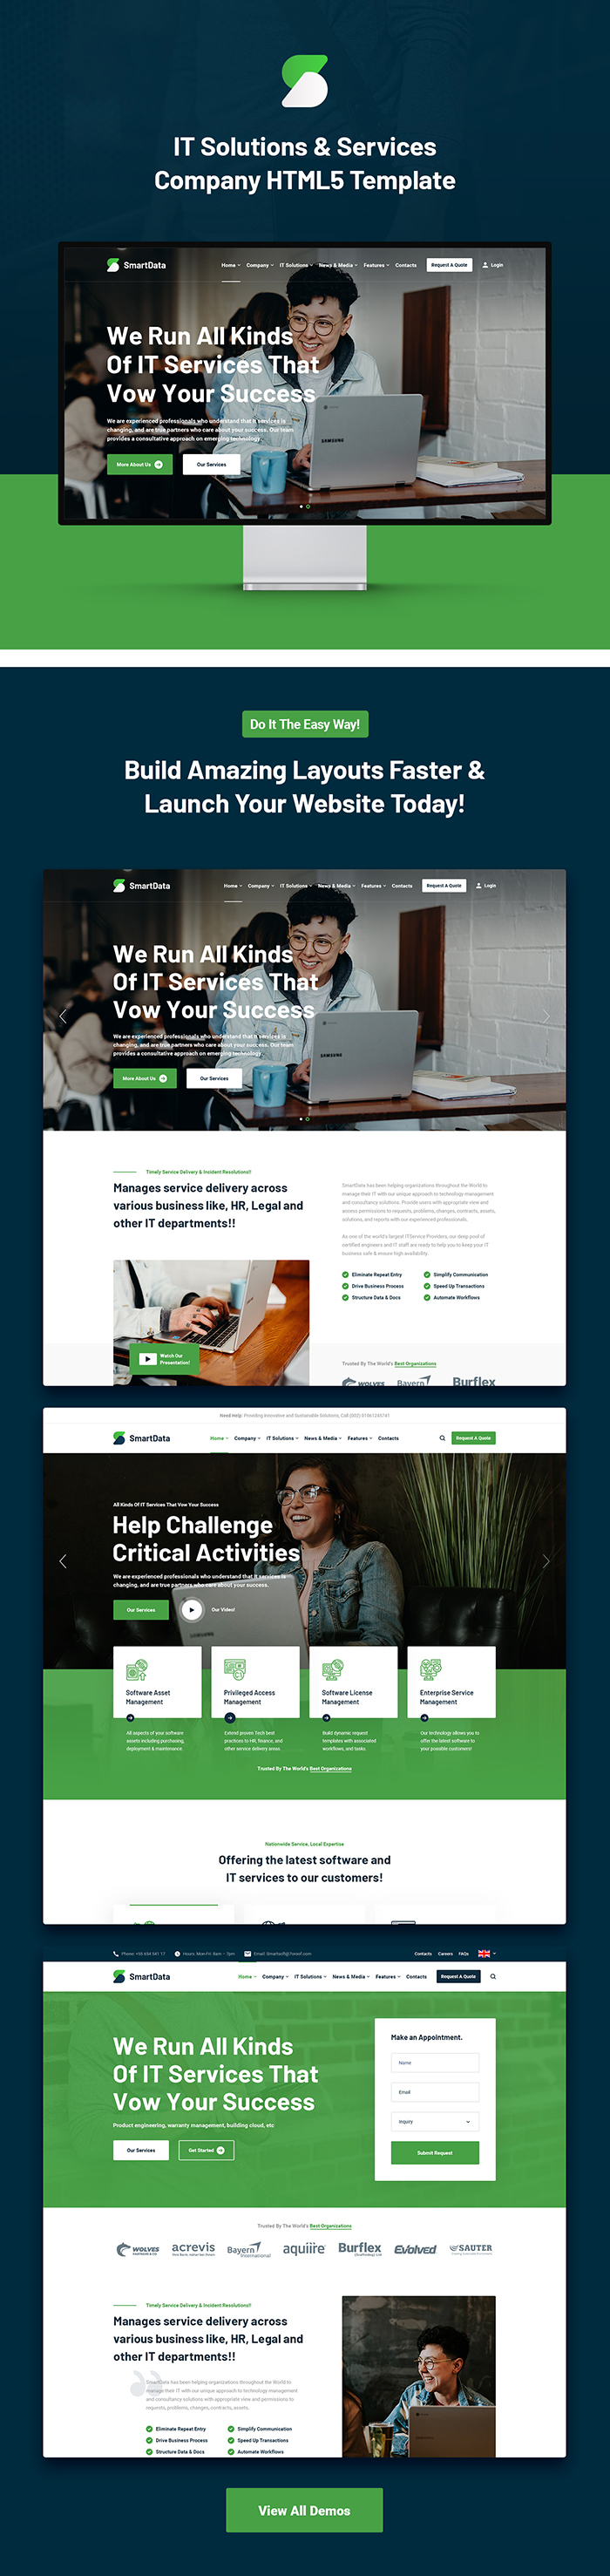 Smartdata - IT Solutions & Services HTML5 Template - 5